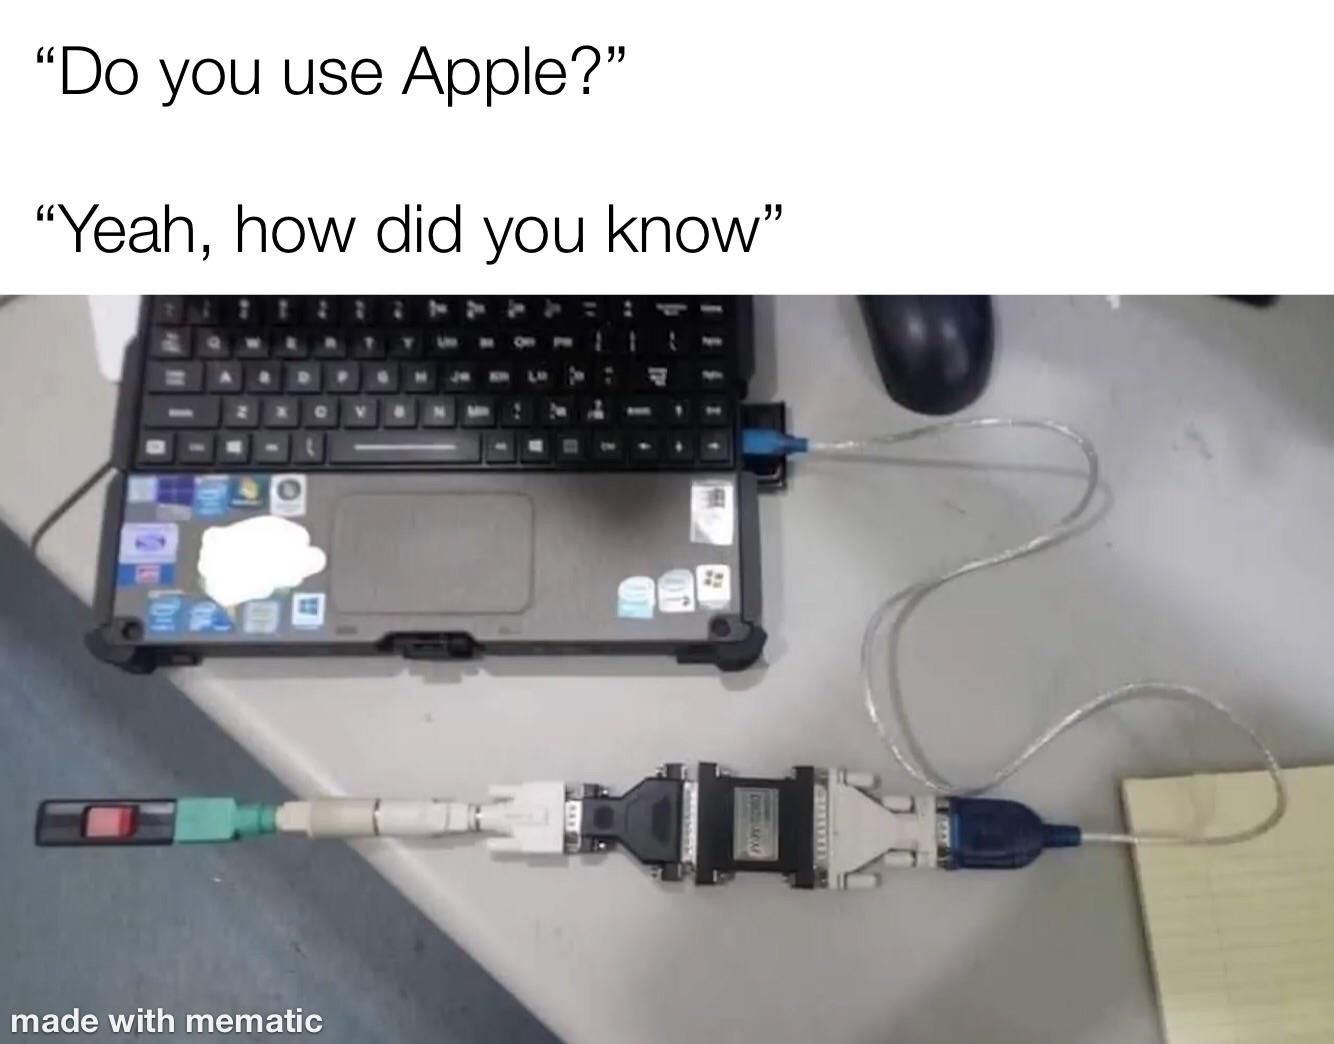 Apple do be like that